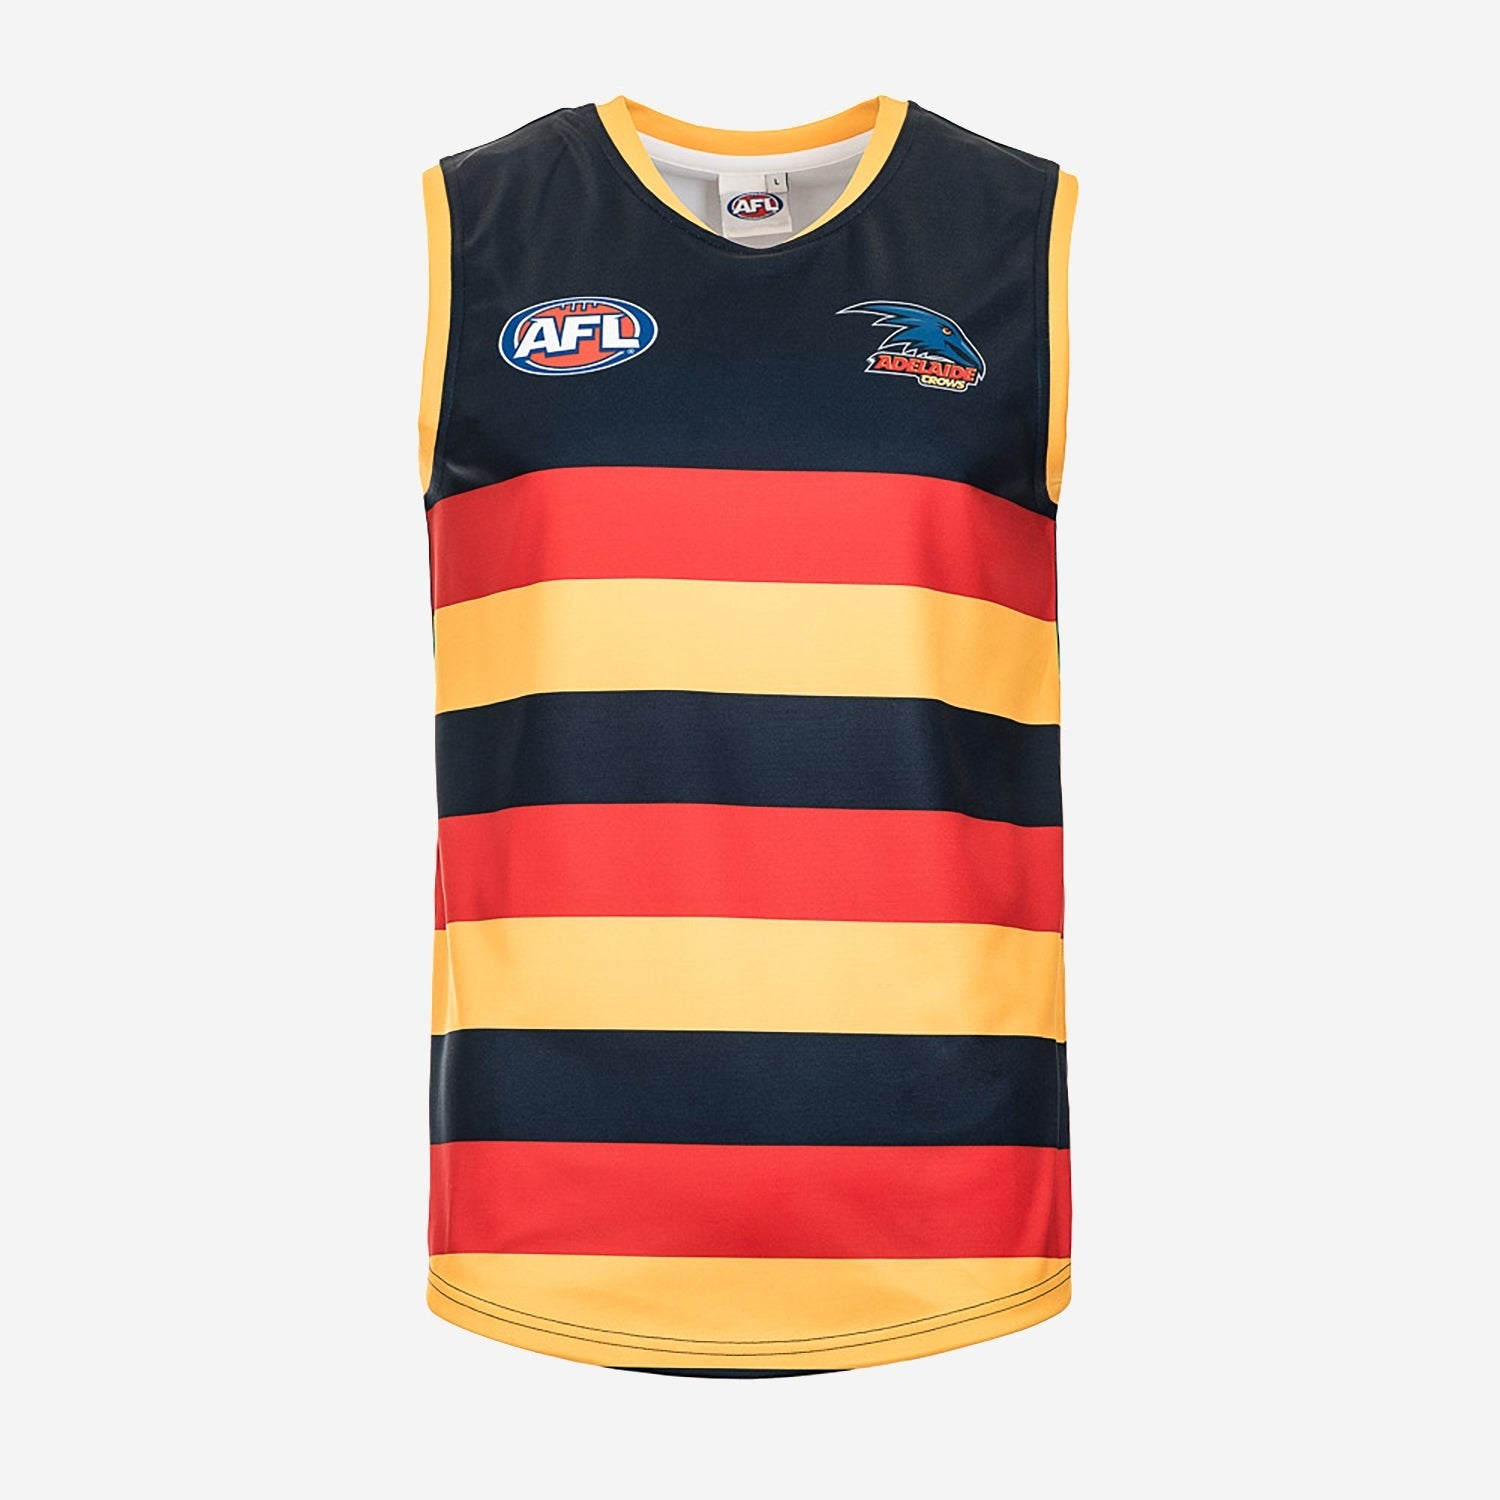 Adelaide Crows - AFL Replica Youth Guernsey - The Cricket Warehouse